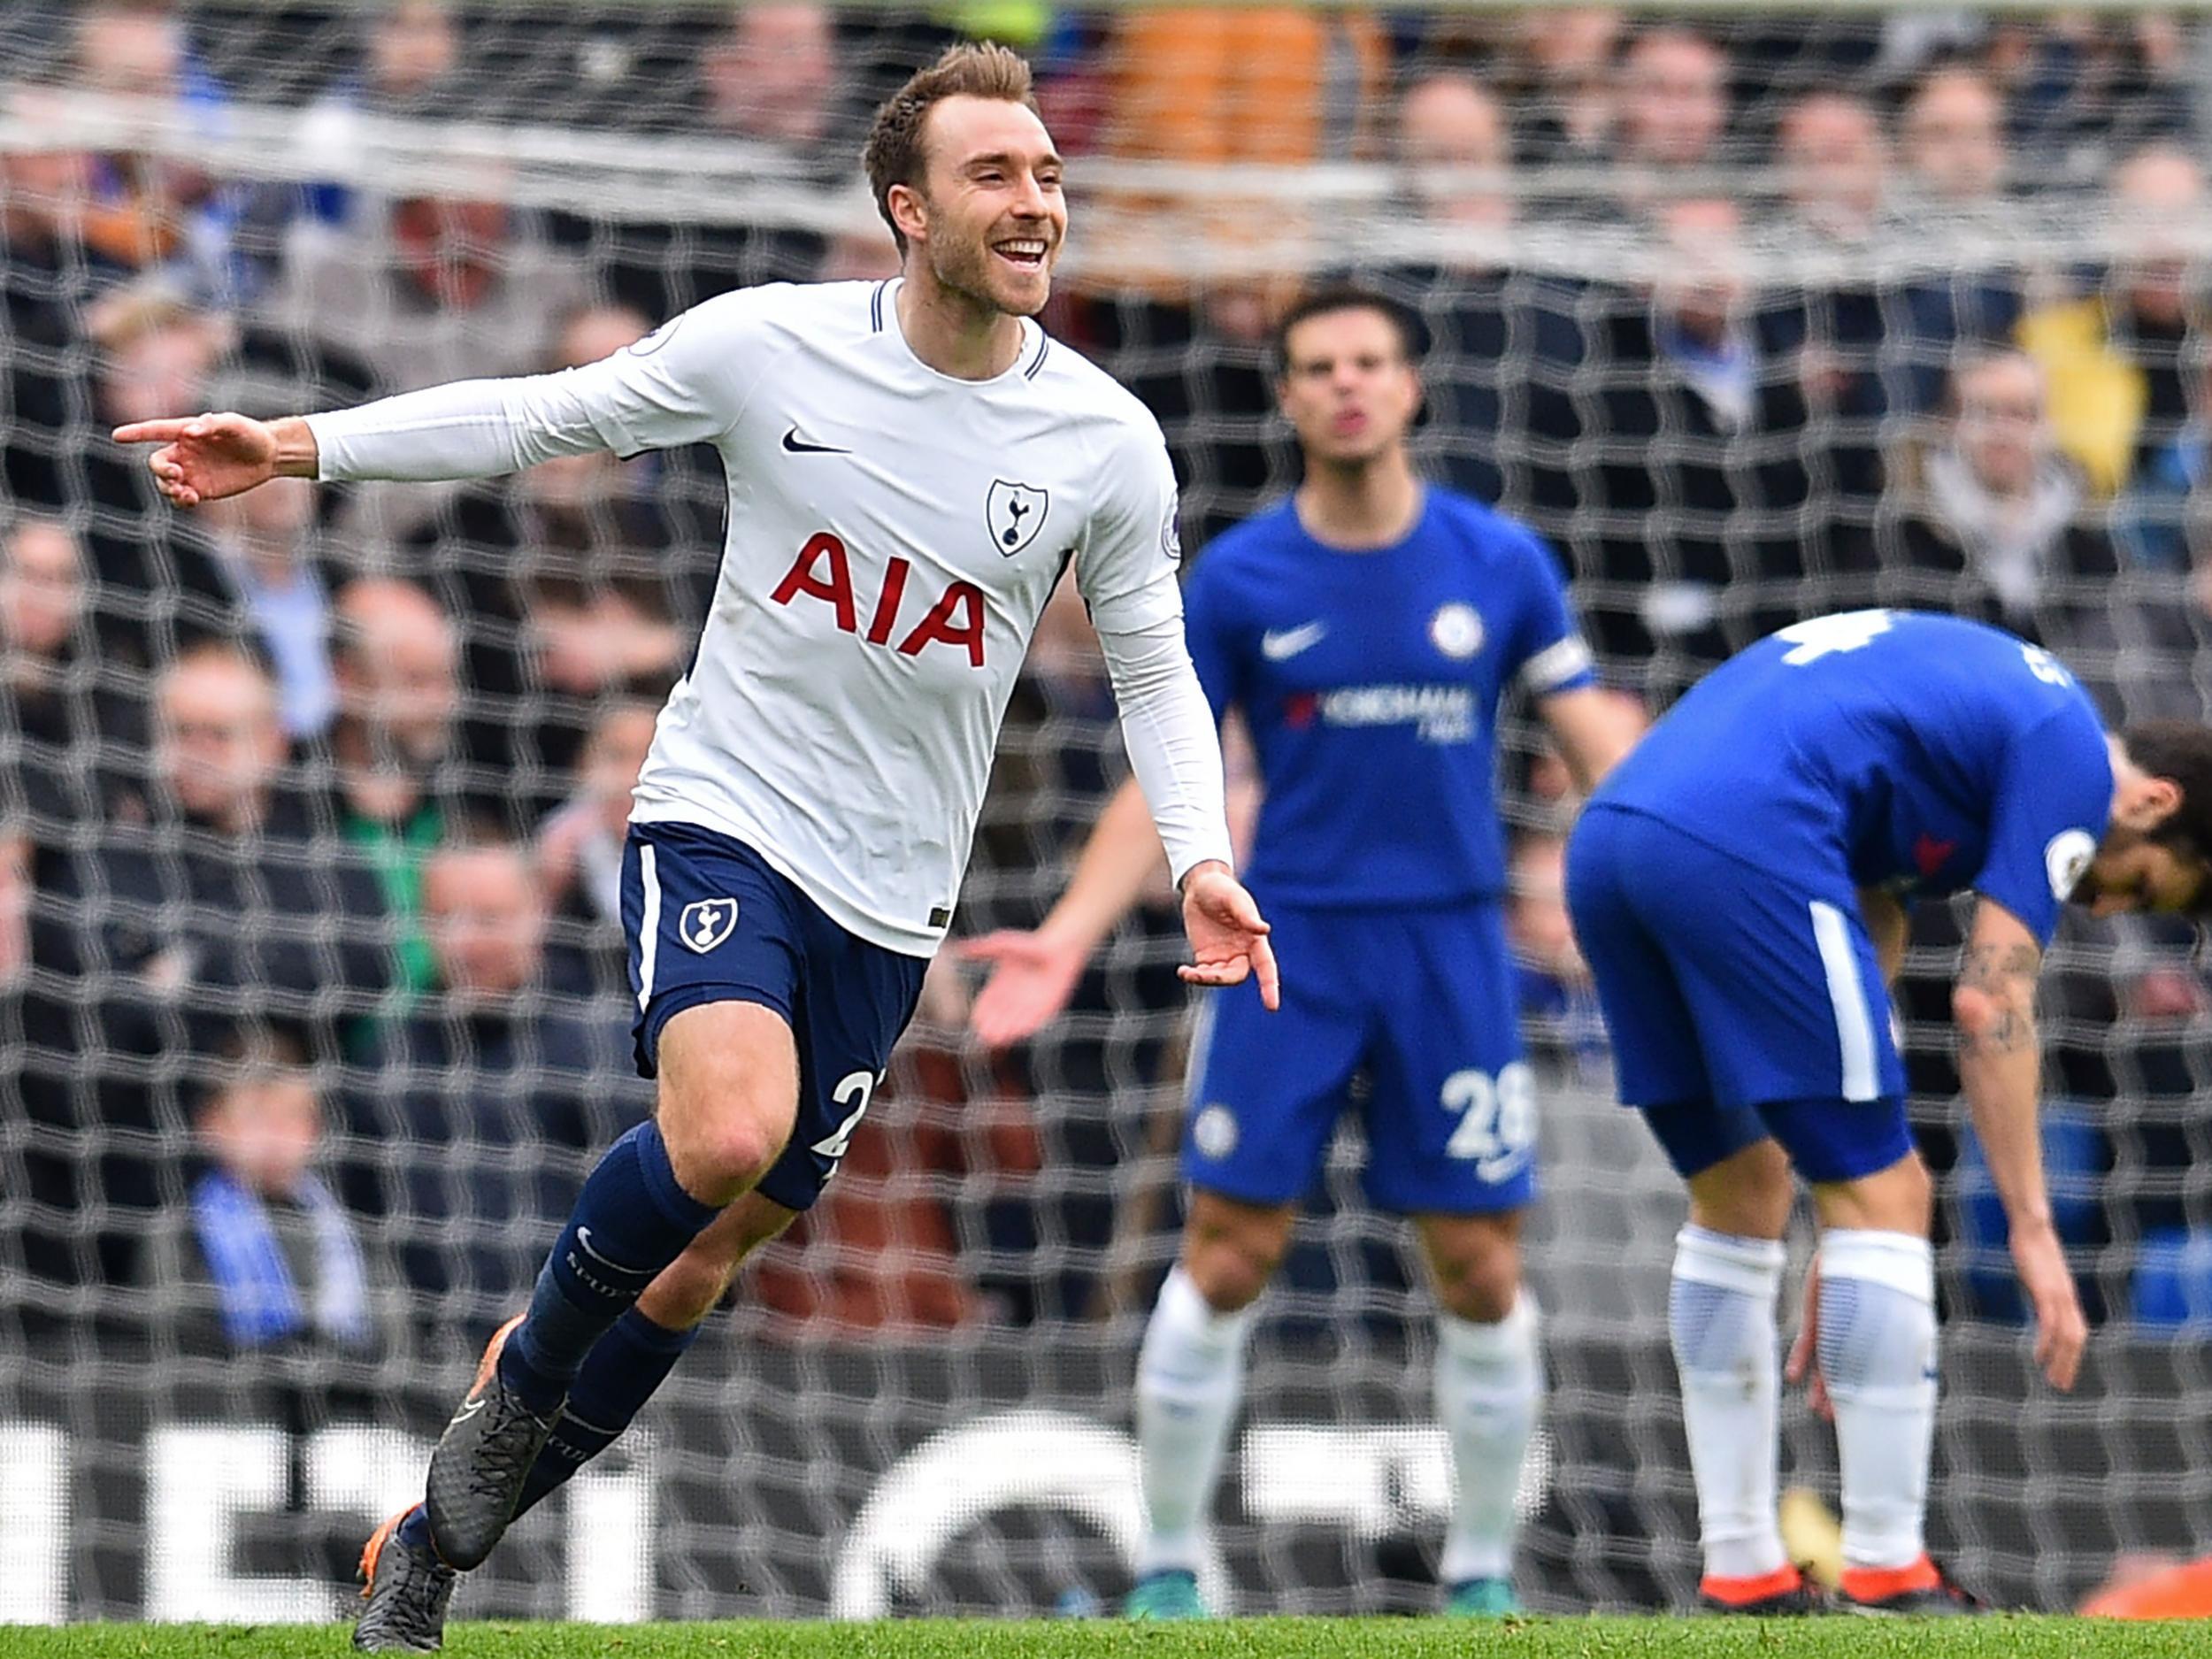 Eriksen has been at his best for Spurs